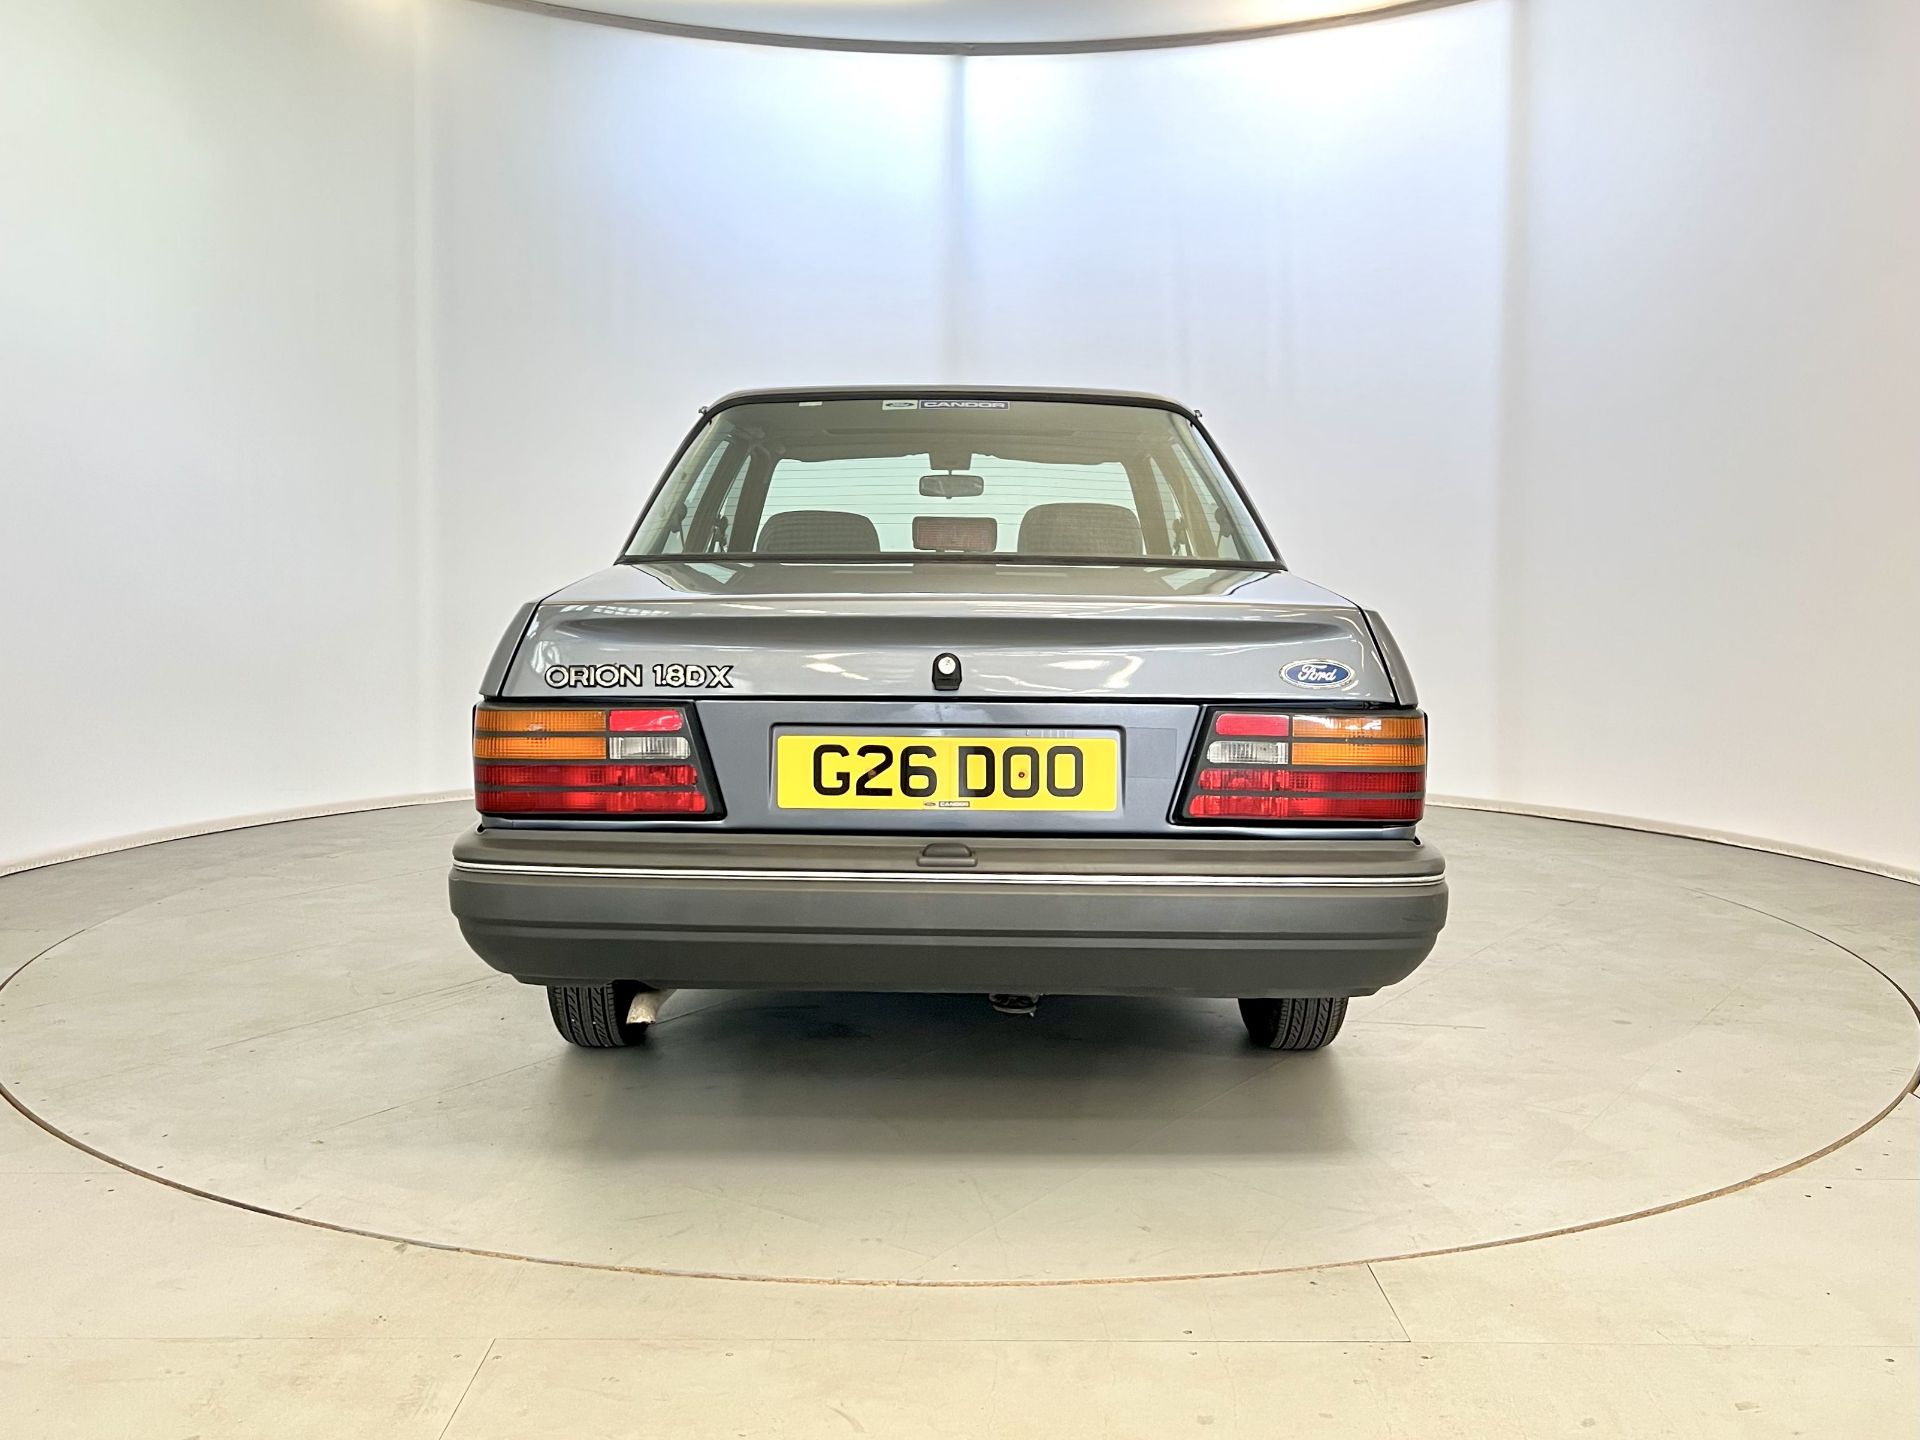 Ford Orion DX - Image 8 of 34